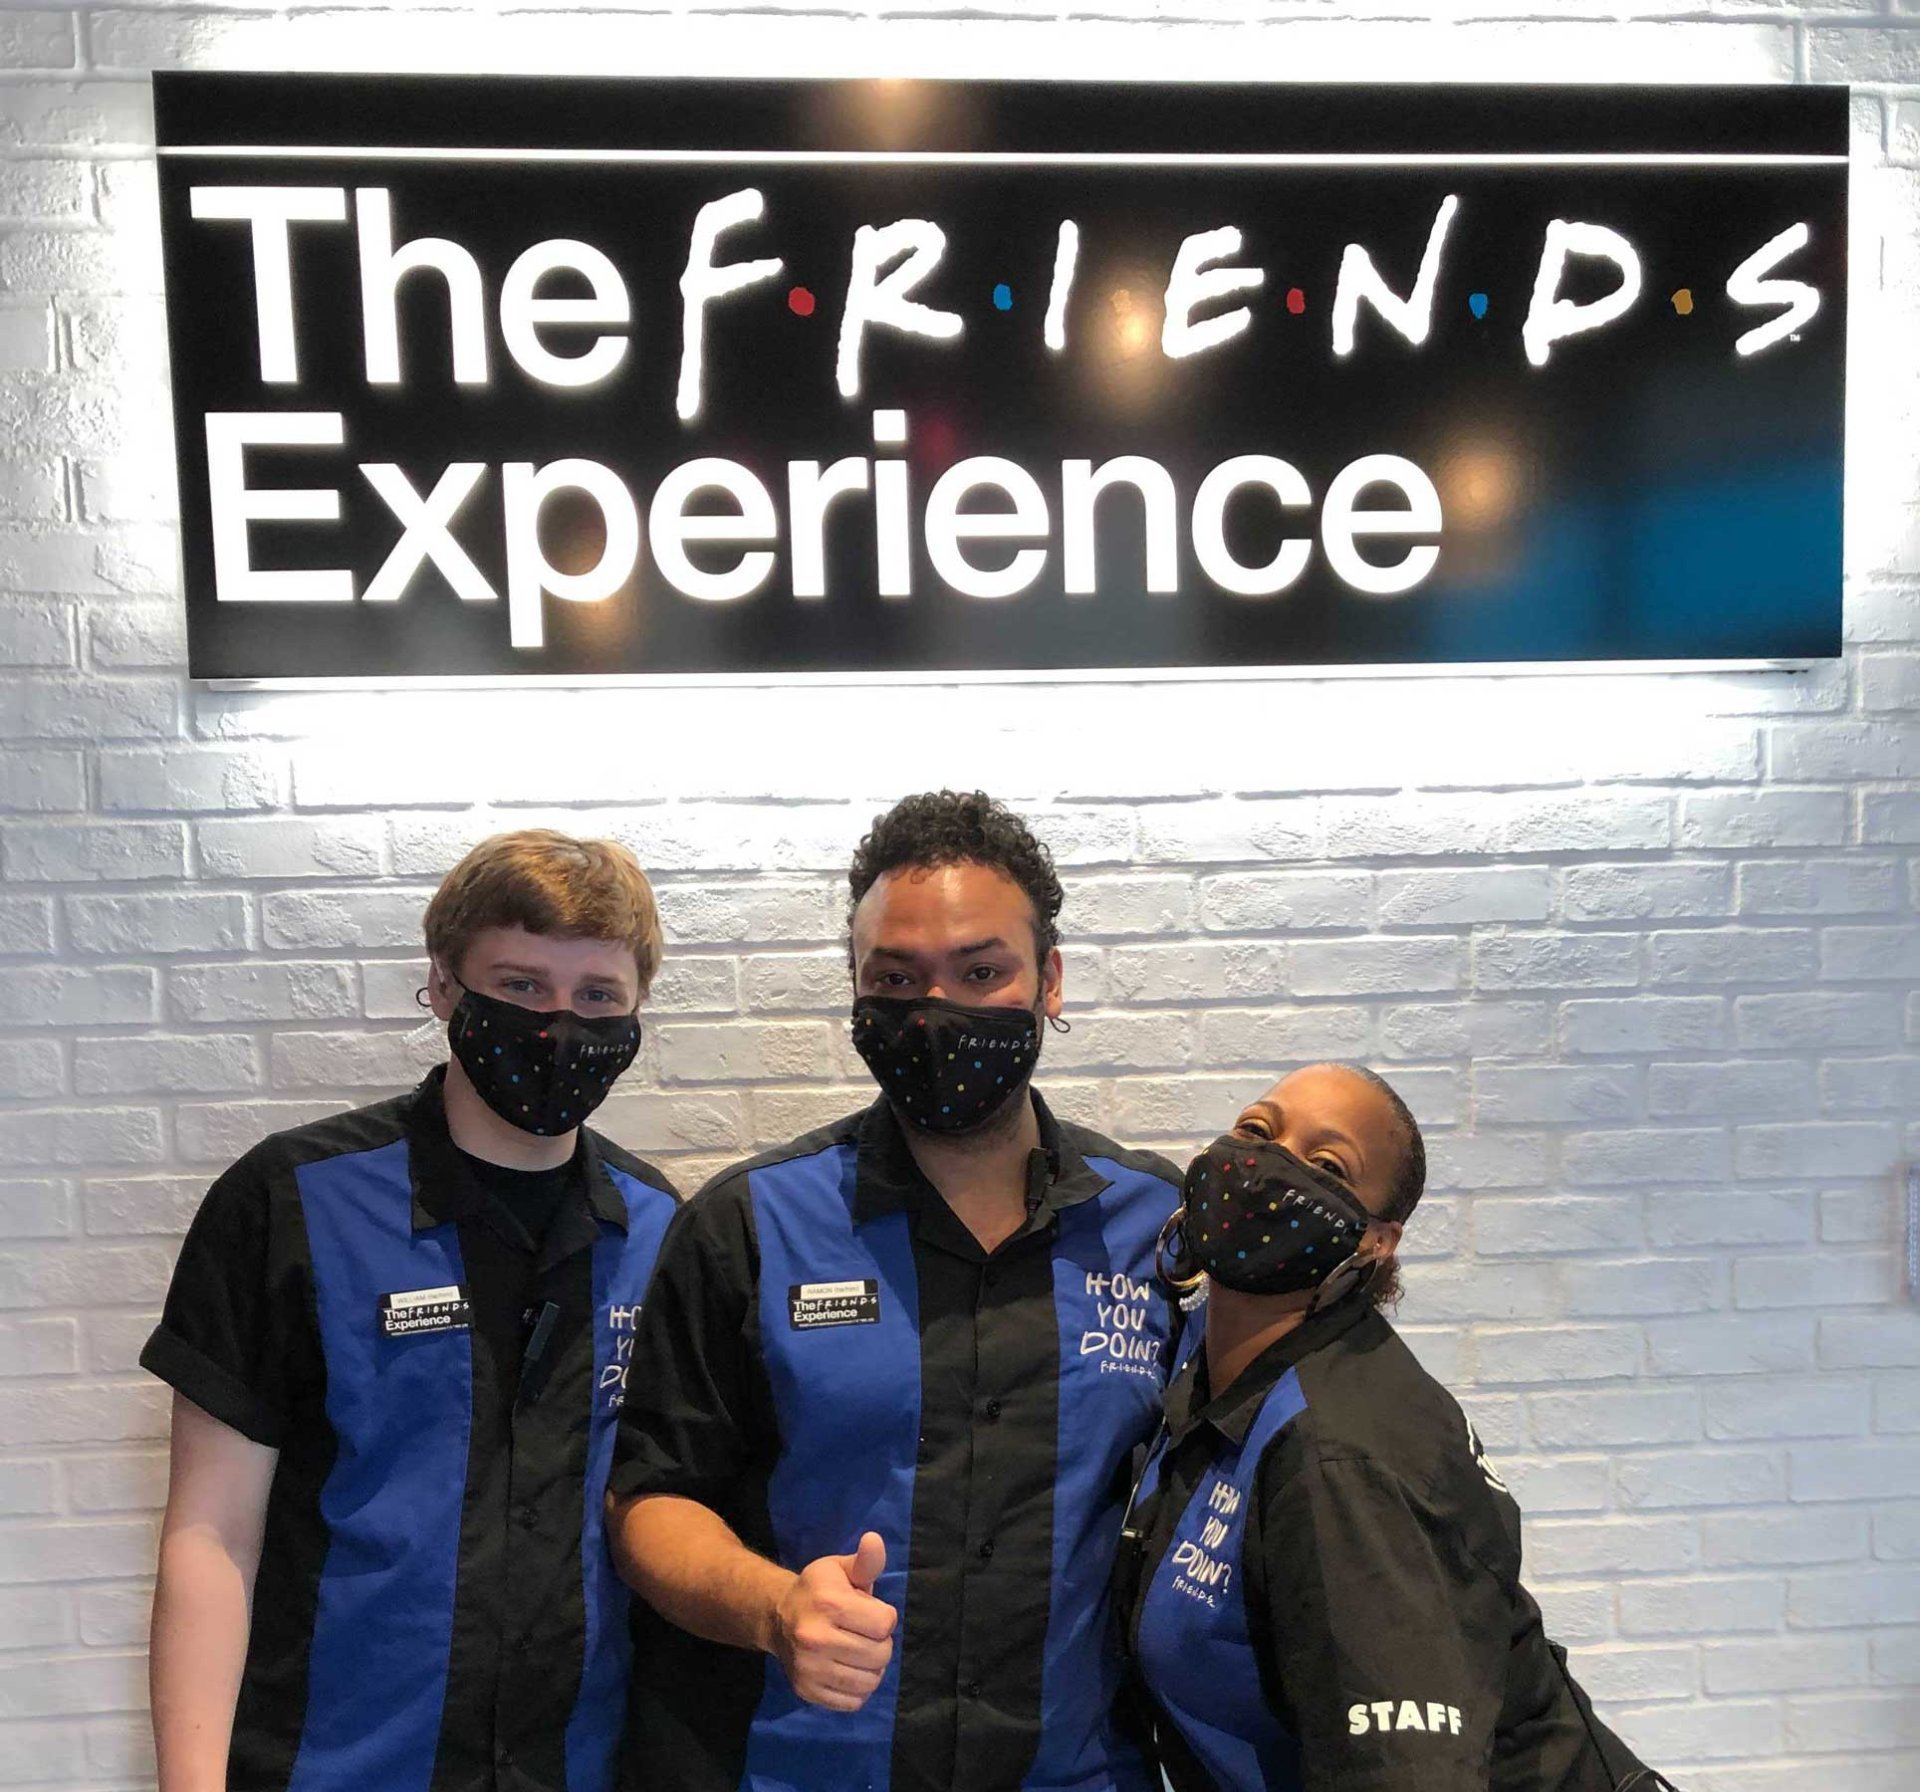 The FRIENDS™ Experience staff group photo